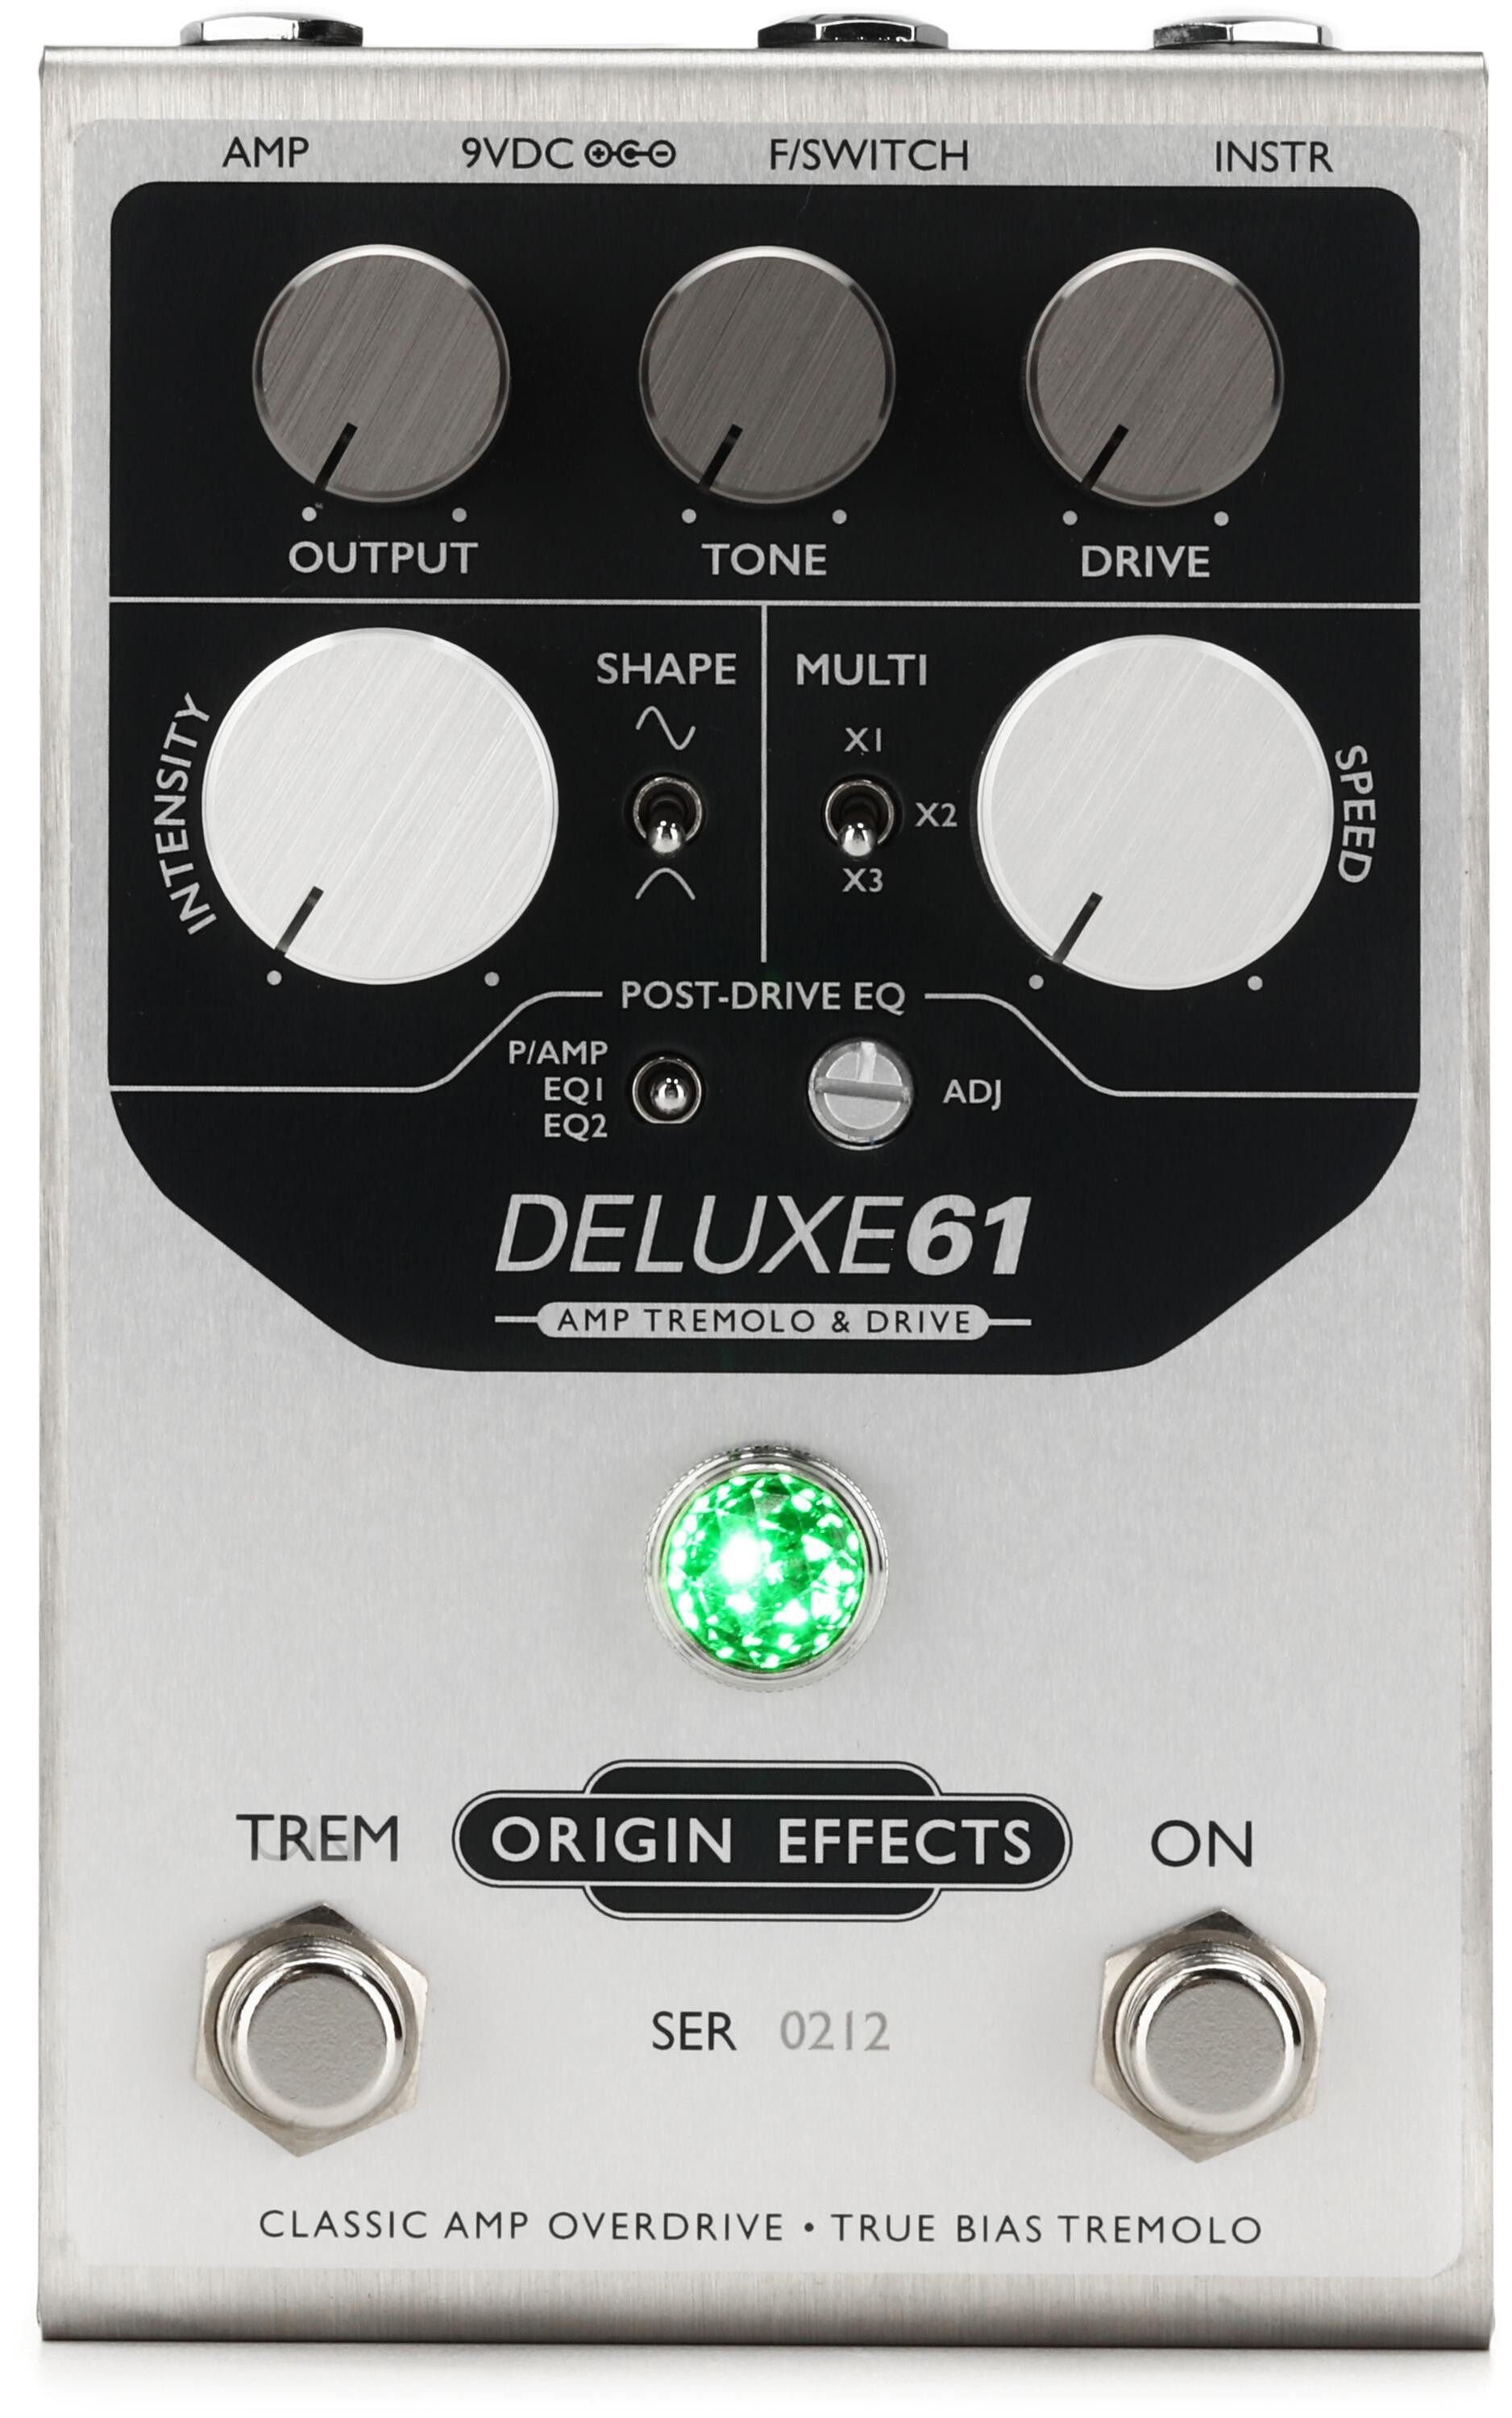 Origin Effects DELUXE61 Amp Tremolo & Drive Pedal | Sweetwater